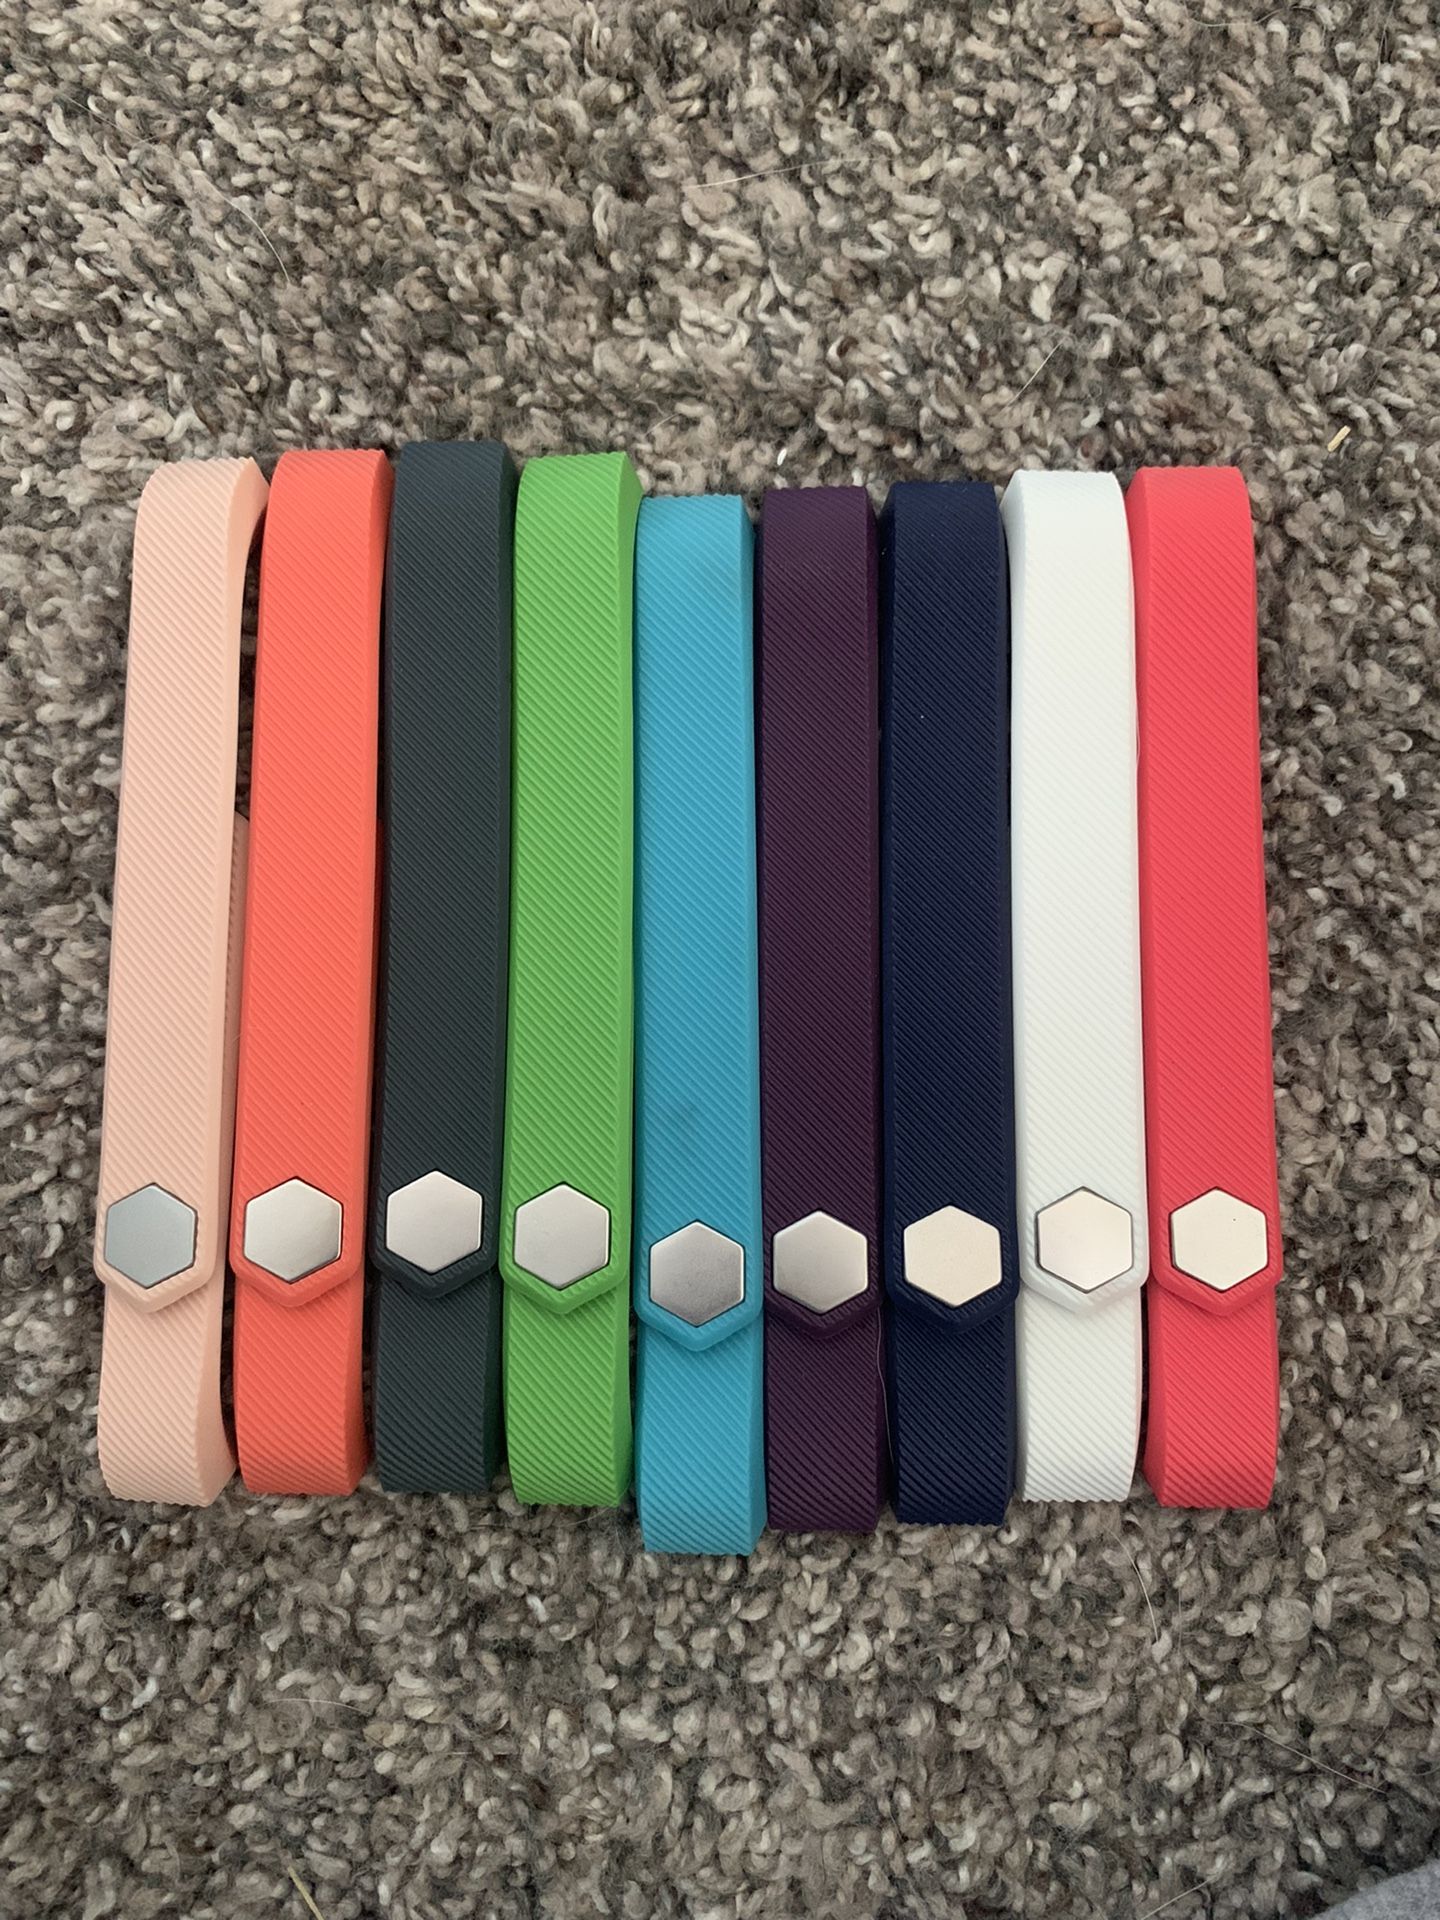 FitBit Bands